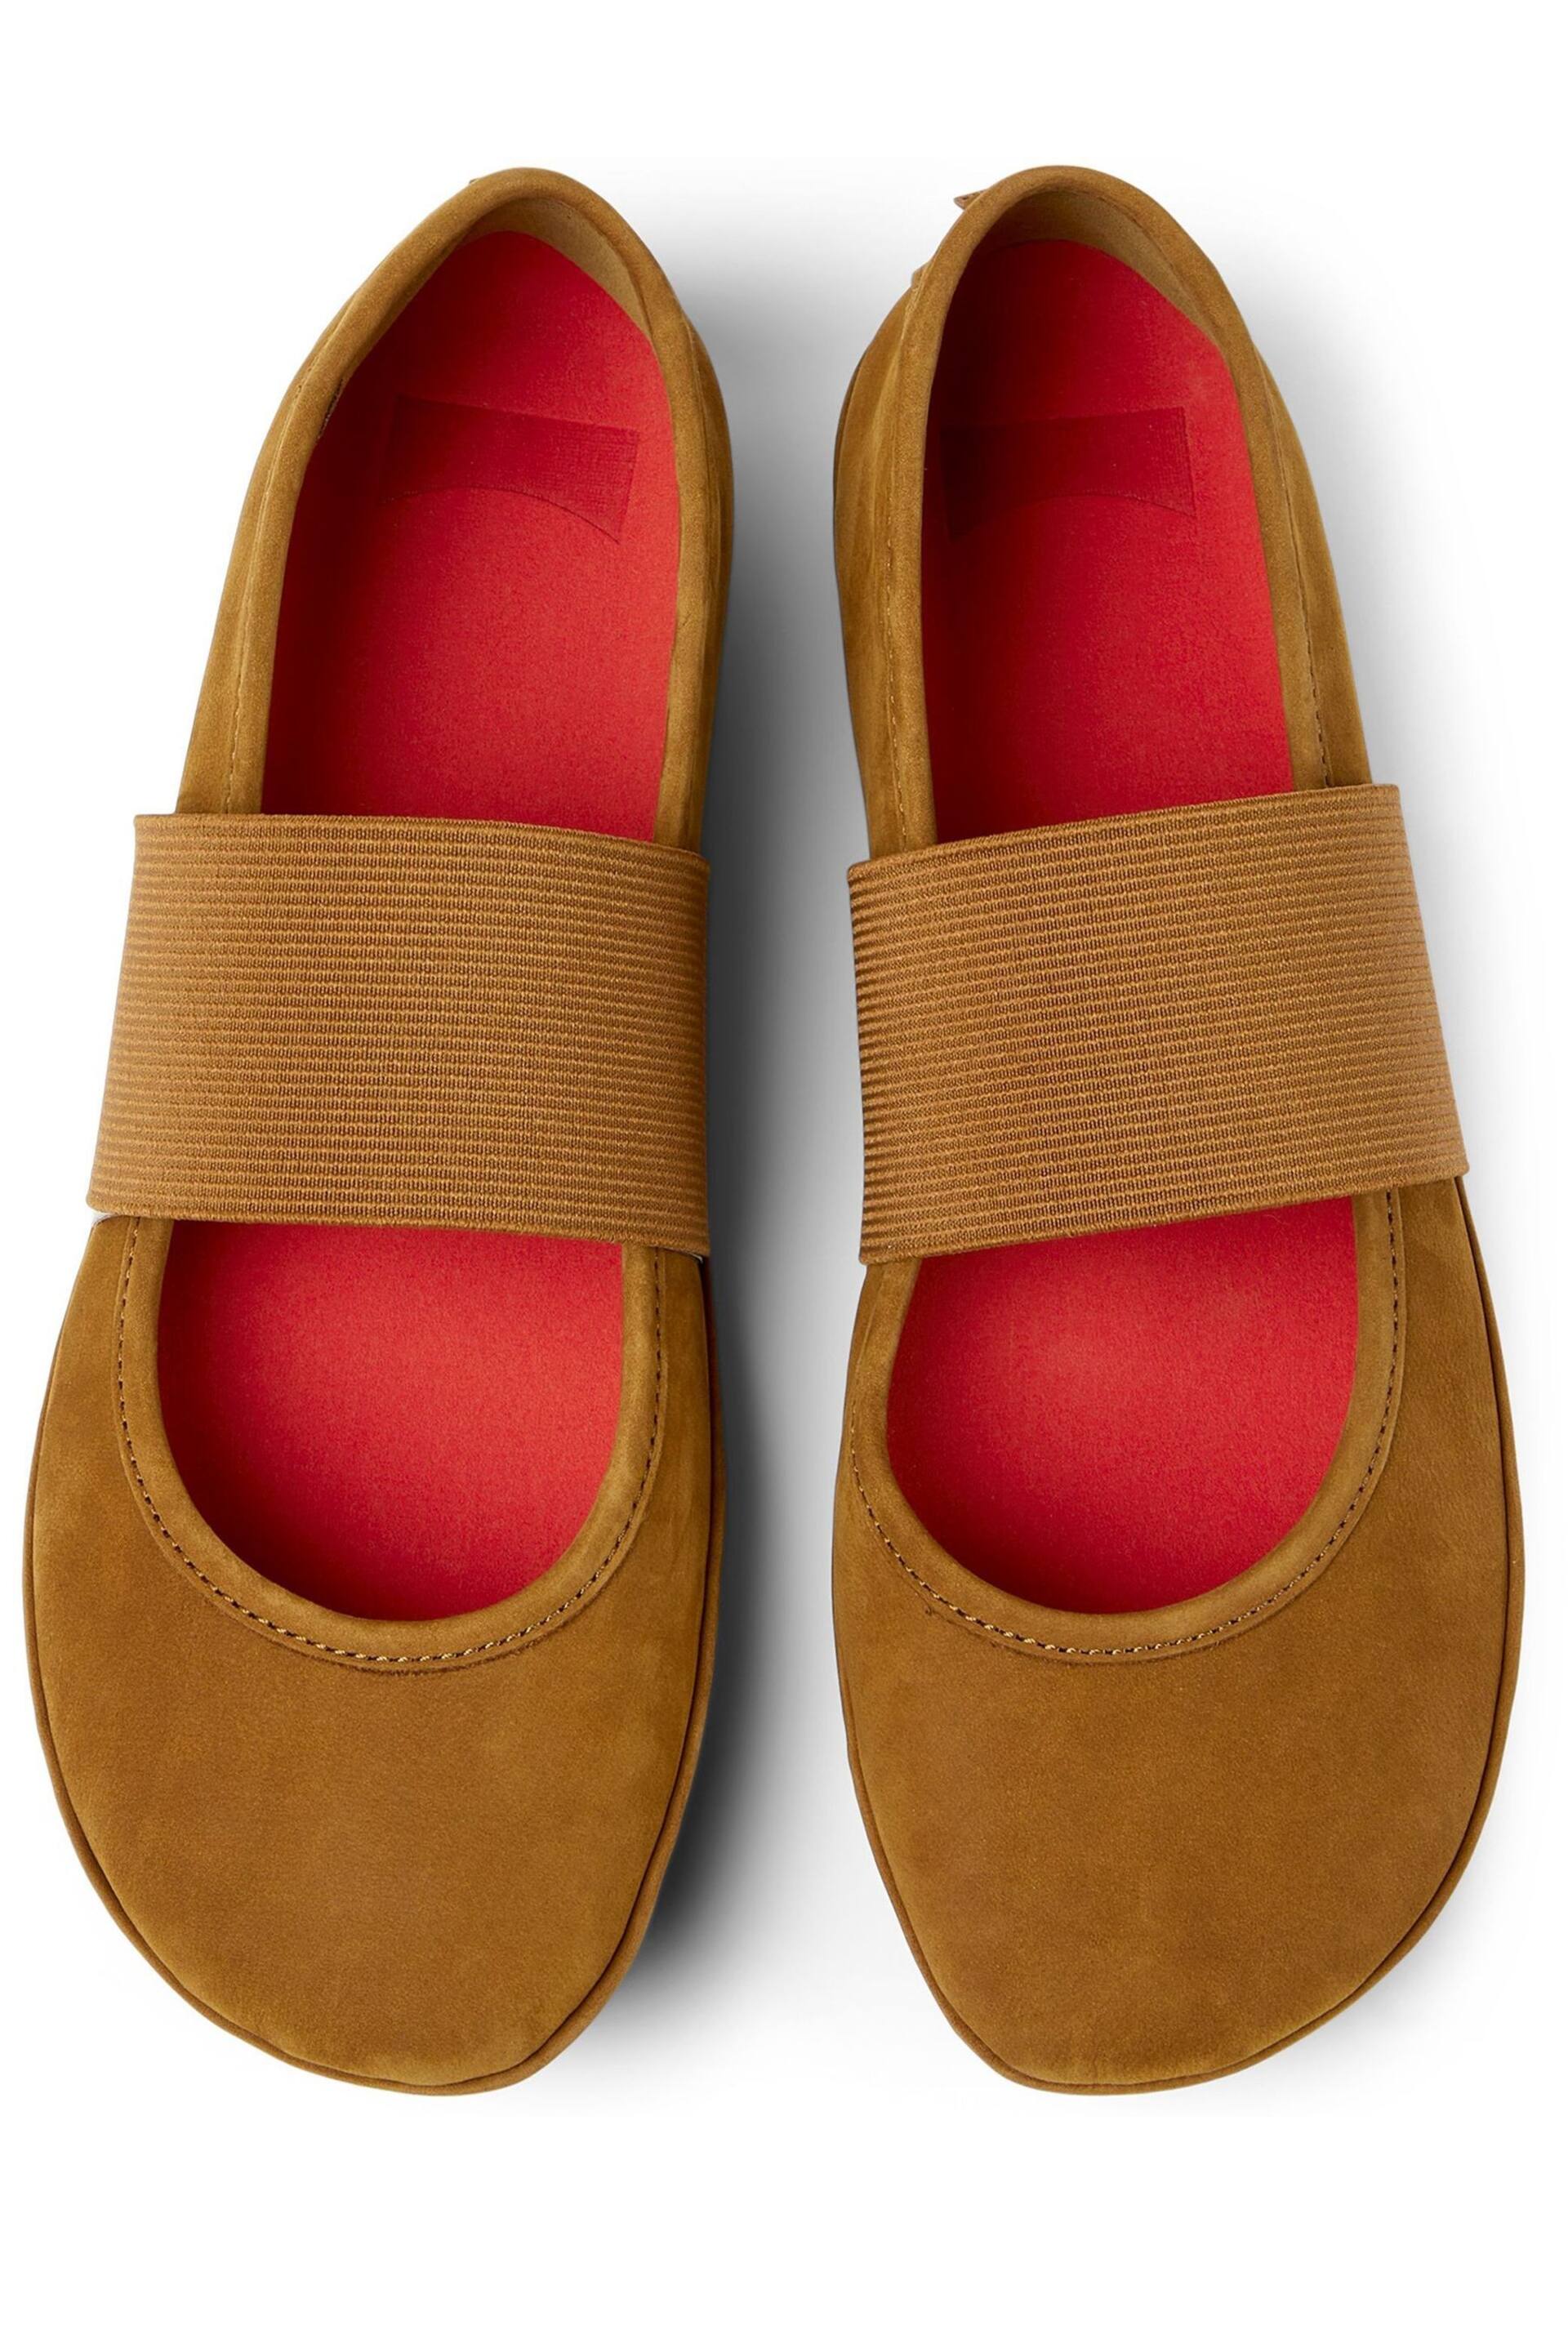 Camper Womens Mary Jane Brown Shoes - Image 4 of 5